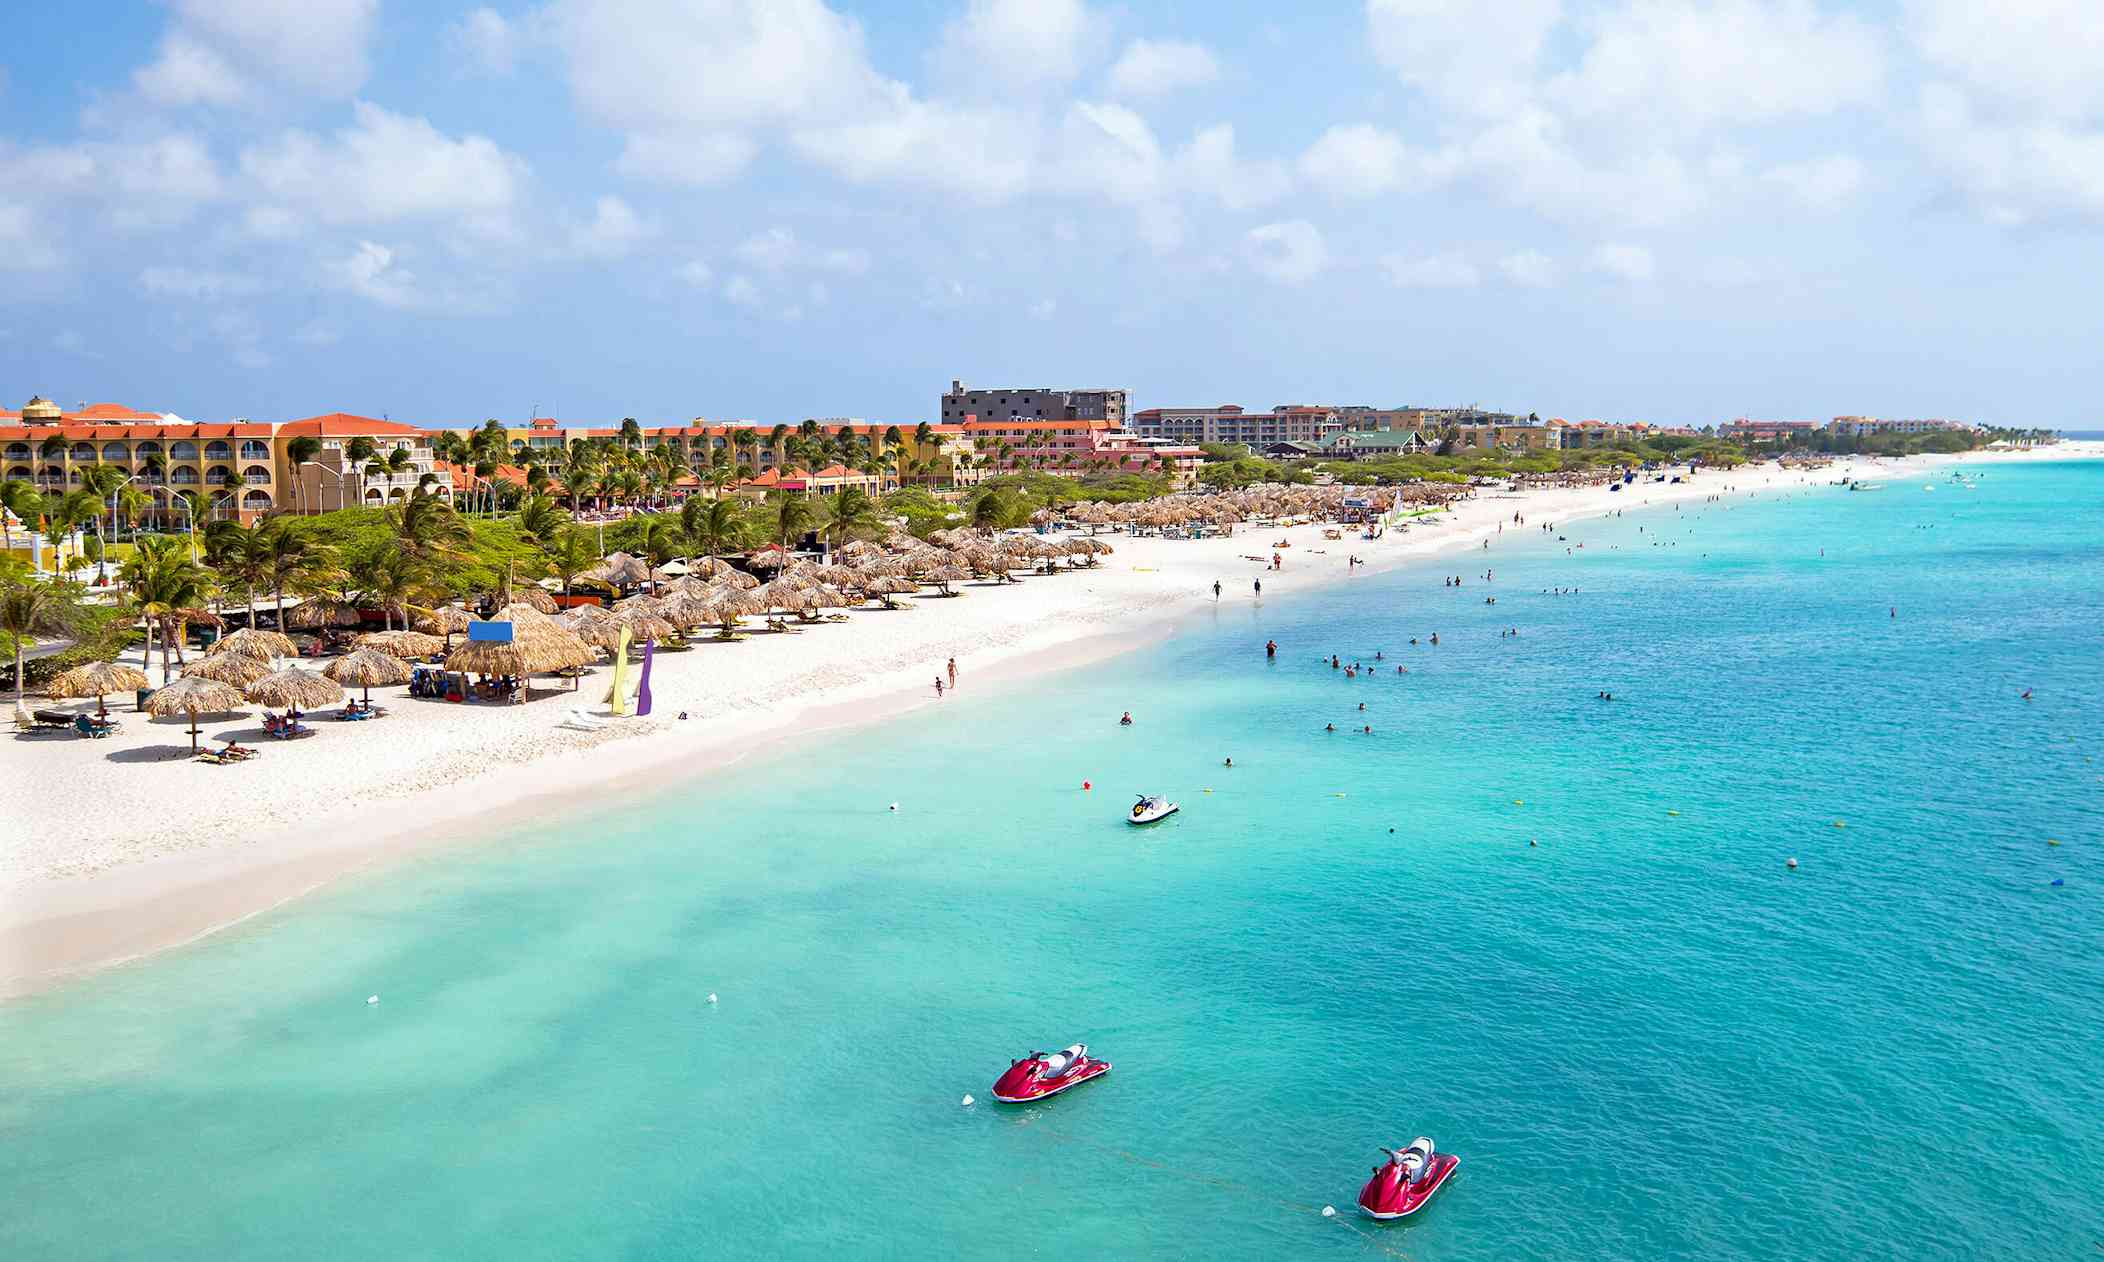 The Perfect Port: Spending the Day in Aruba